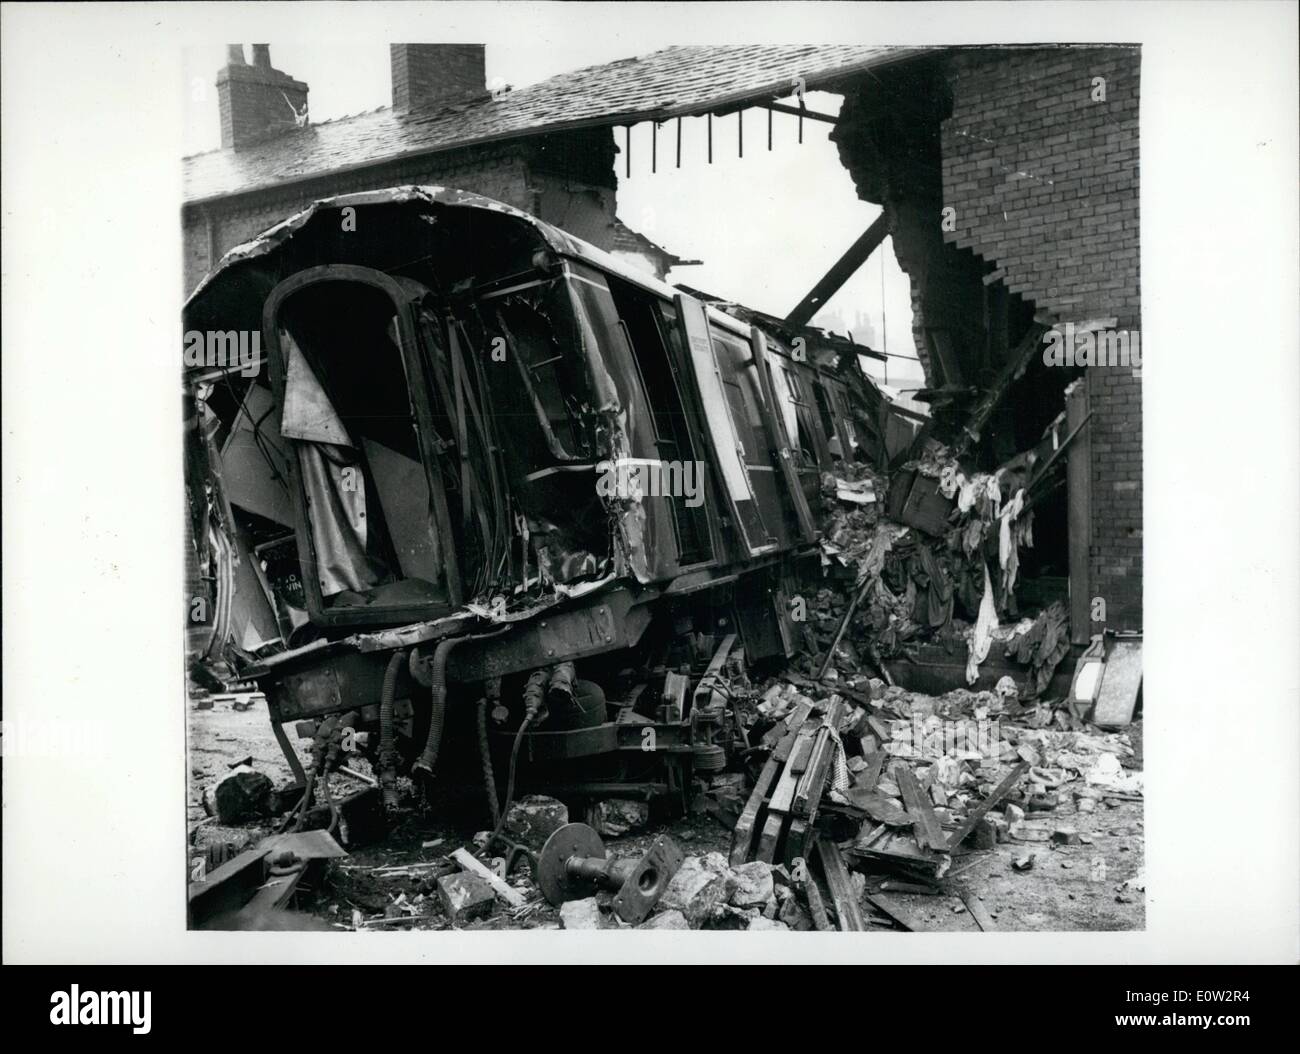 Feb. 02, 1961 - Runaway train rams houses eight people had miraculous escapes.: Eight people had miraculous escaped from death when a 120-ton diesel train crashed through station buffers and a stone wall to plough across a road and through a row of terraced houses at 35-40 mph. near Oldham, Lanos, yesterday. Driver Harry Pearse sounded his horn for a quarter of a mile as the train hurtled out of control down a gradient into Royton Station. Then, 30 yards from the buffers, he flung himself on to the station platform Stock Photo